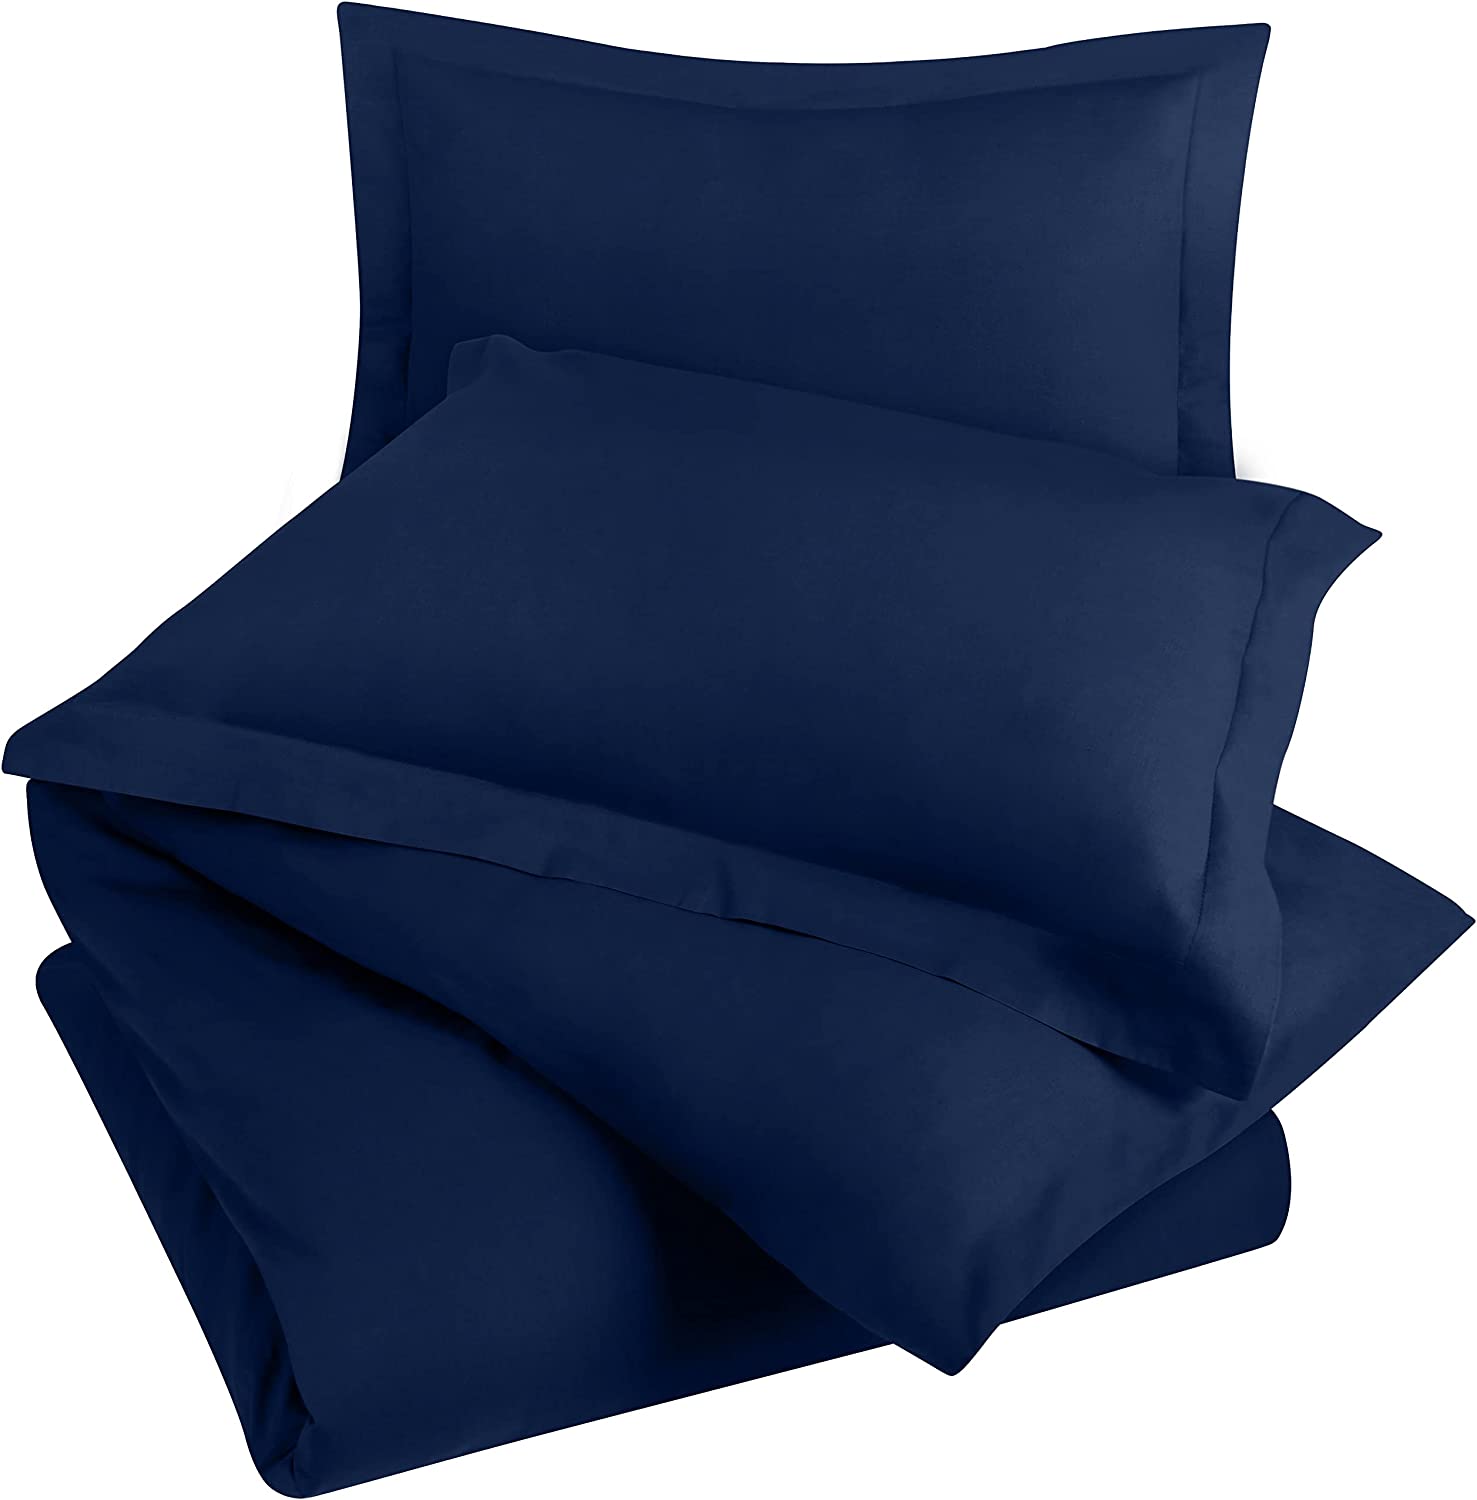 Duvet Cover King Size Set - 1 Duvet Cover with 2 Pillow Shams - 3 Pieces Comforter Cover with Zipper Closure - Ultra Soft Brushed - Blue